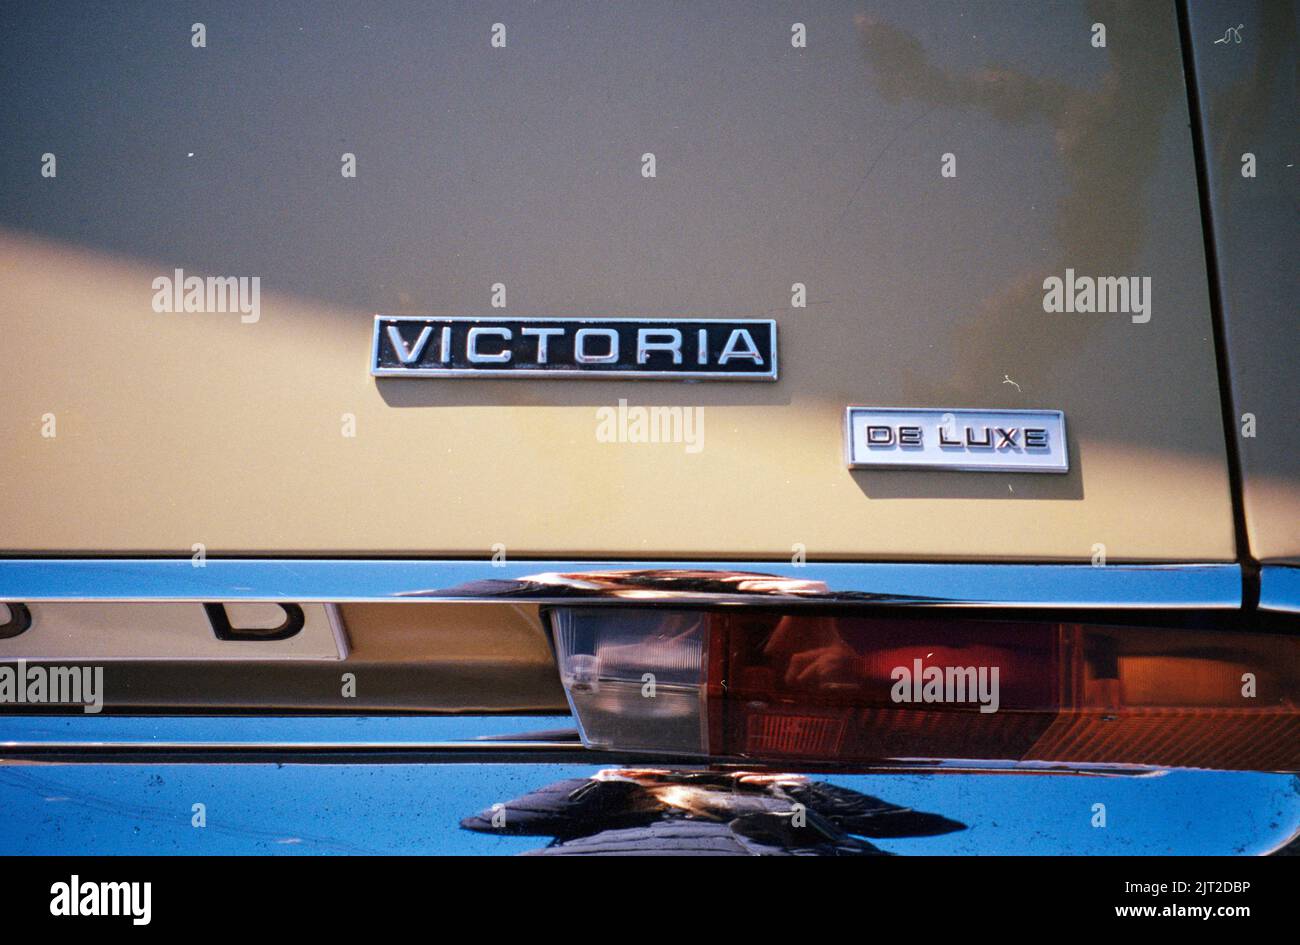 A closeup of the logo, tail lights, and plat numbers of an old Austin Victoria De Luxe car in cream color Stock Photo